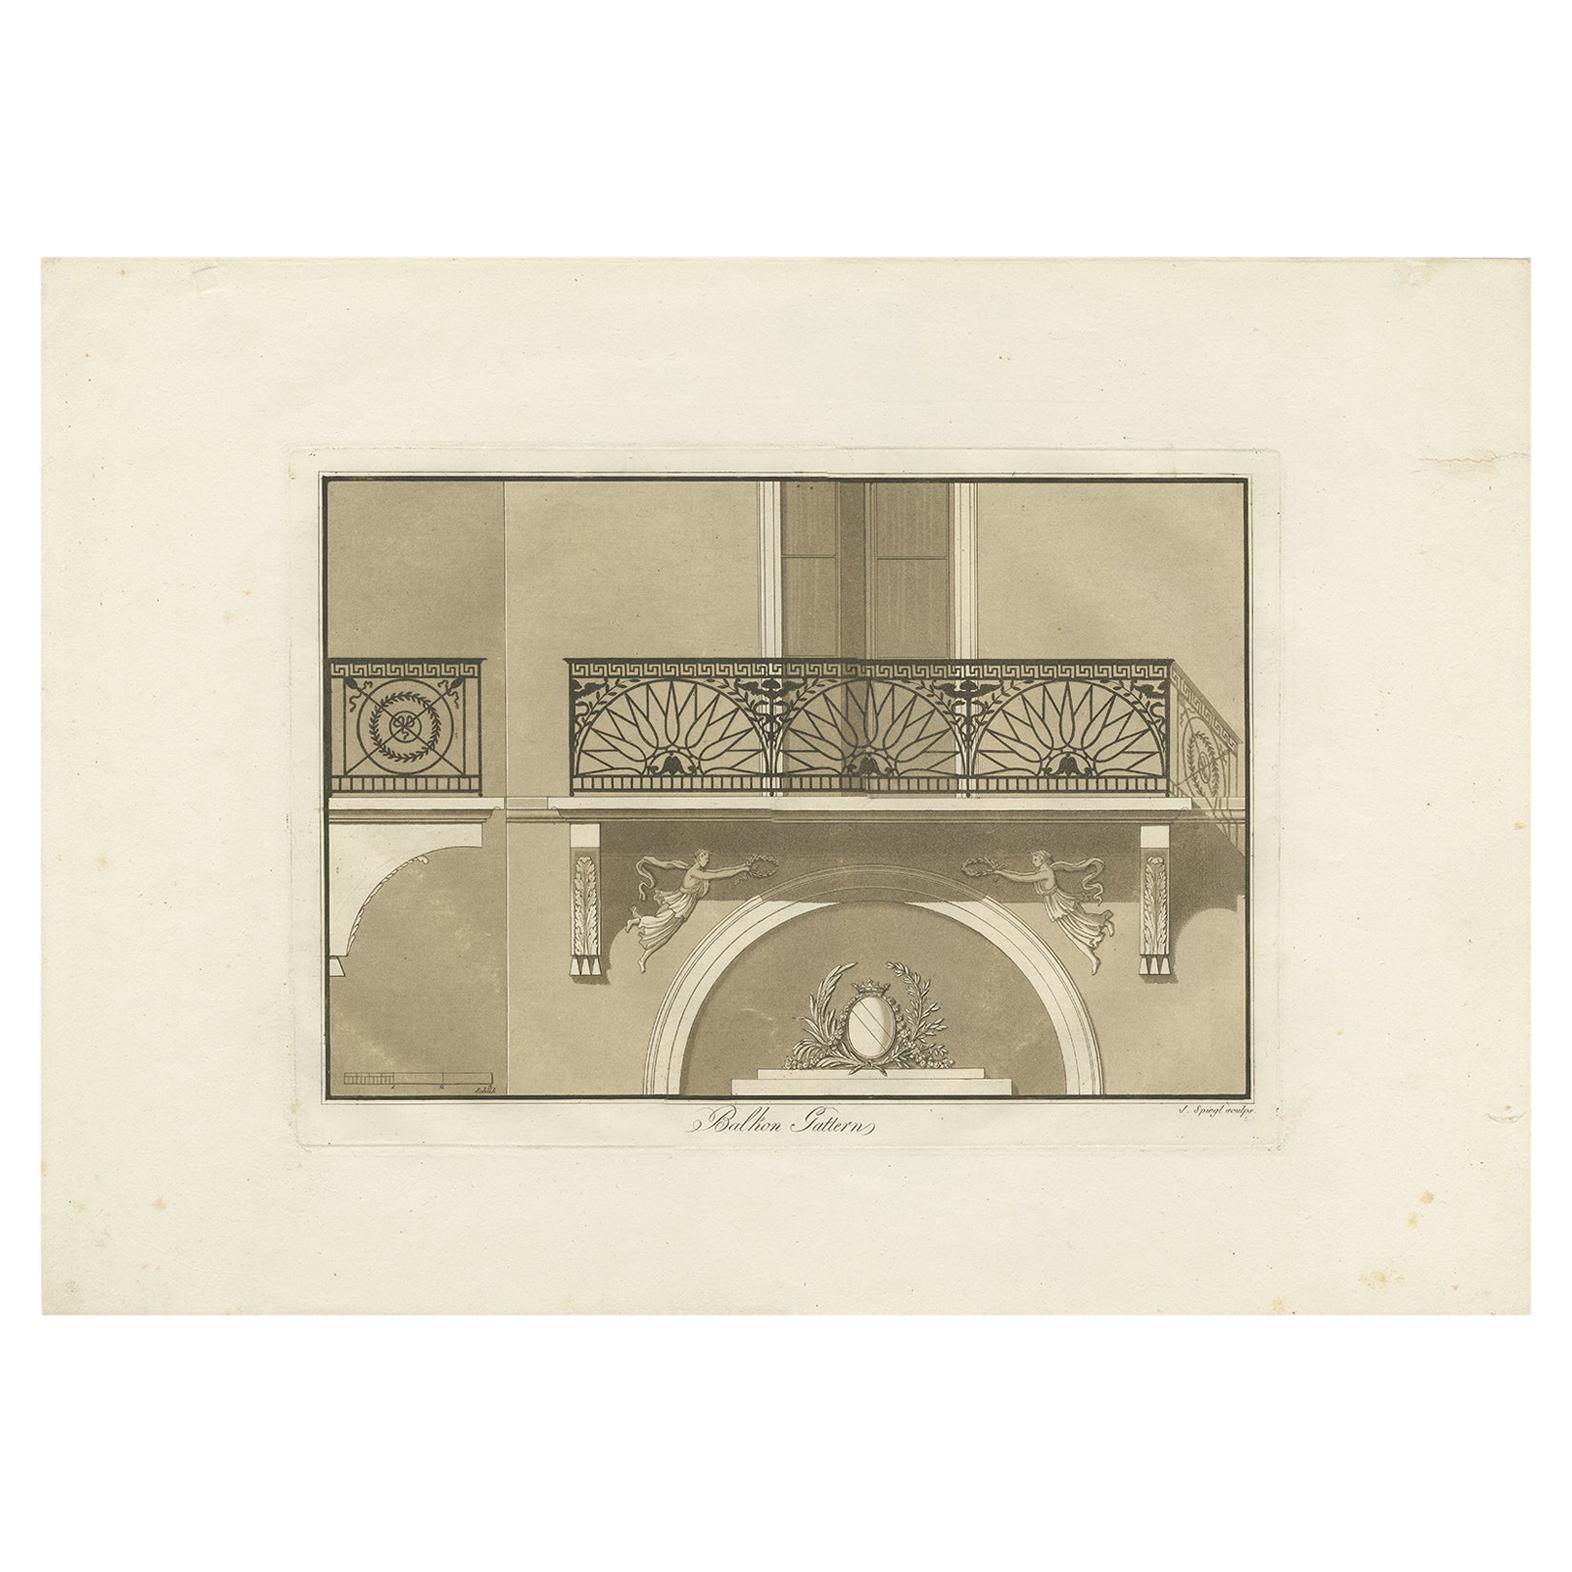 Antique Print of the Architecture of a Balcony by Spiegl, circa 1730